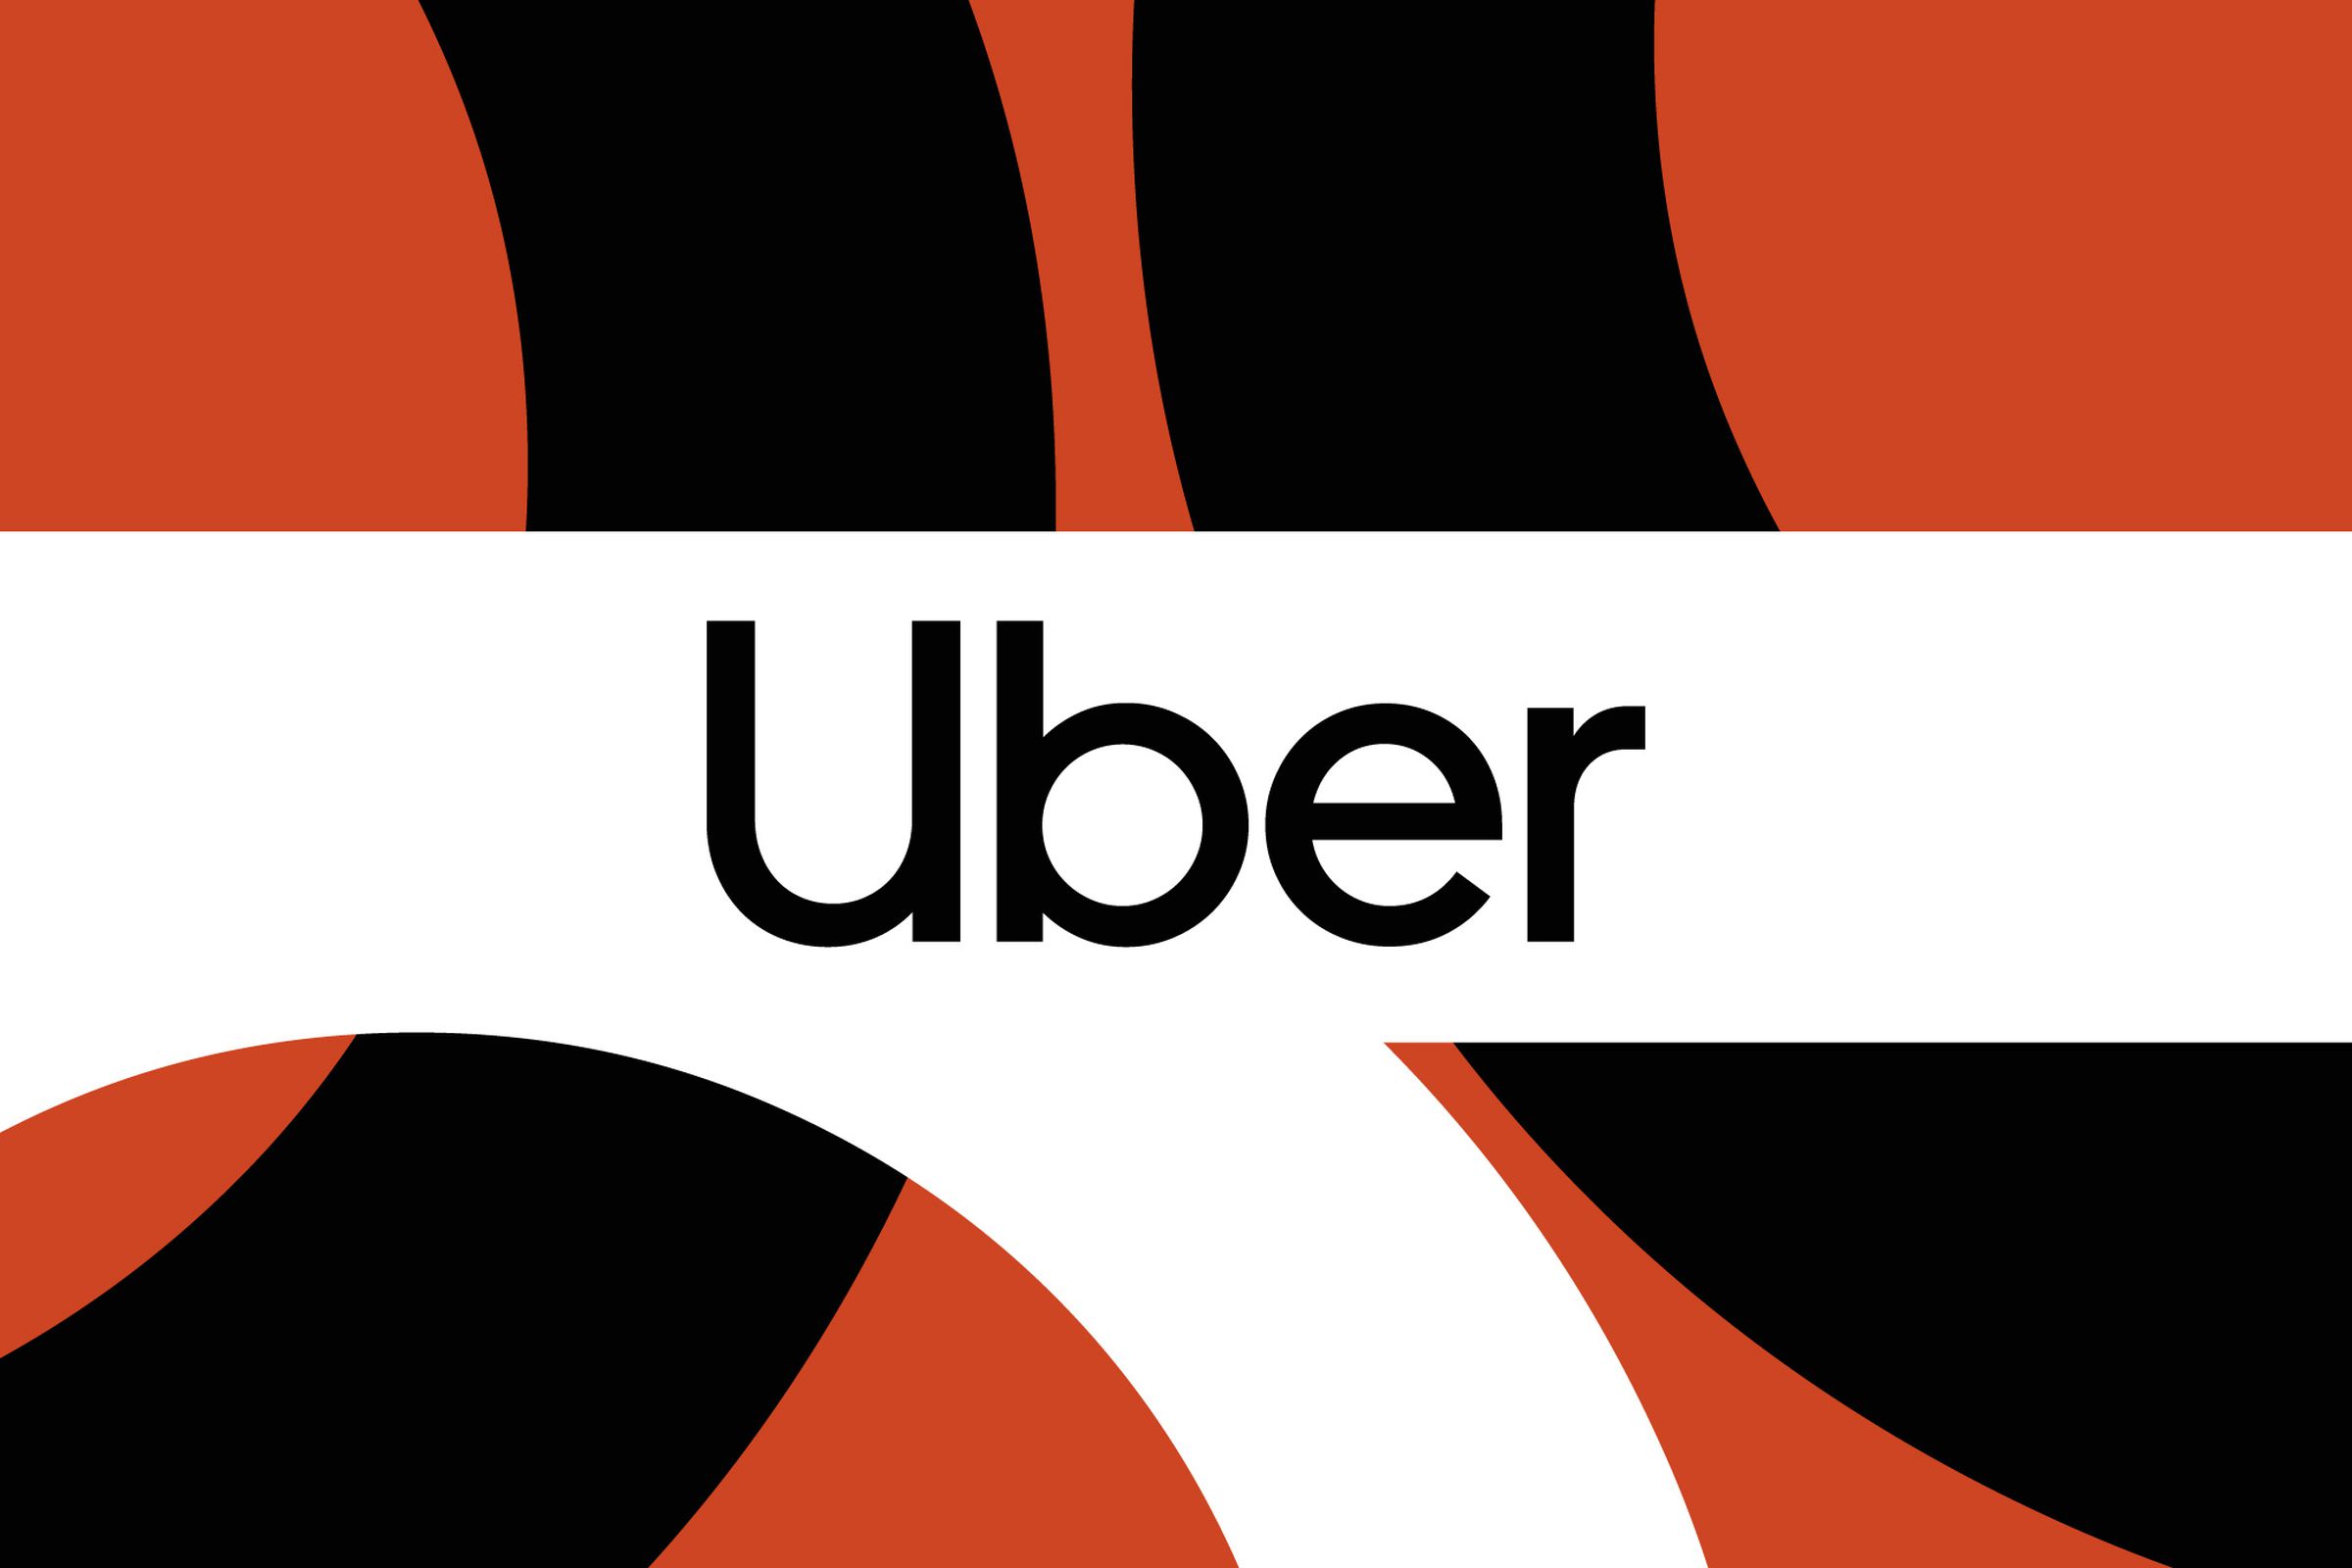 The Uber logo on a red, black, and white background